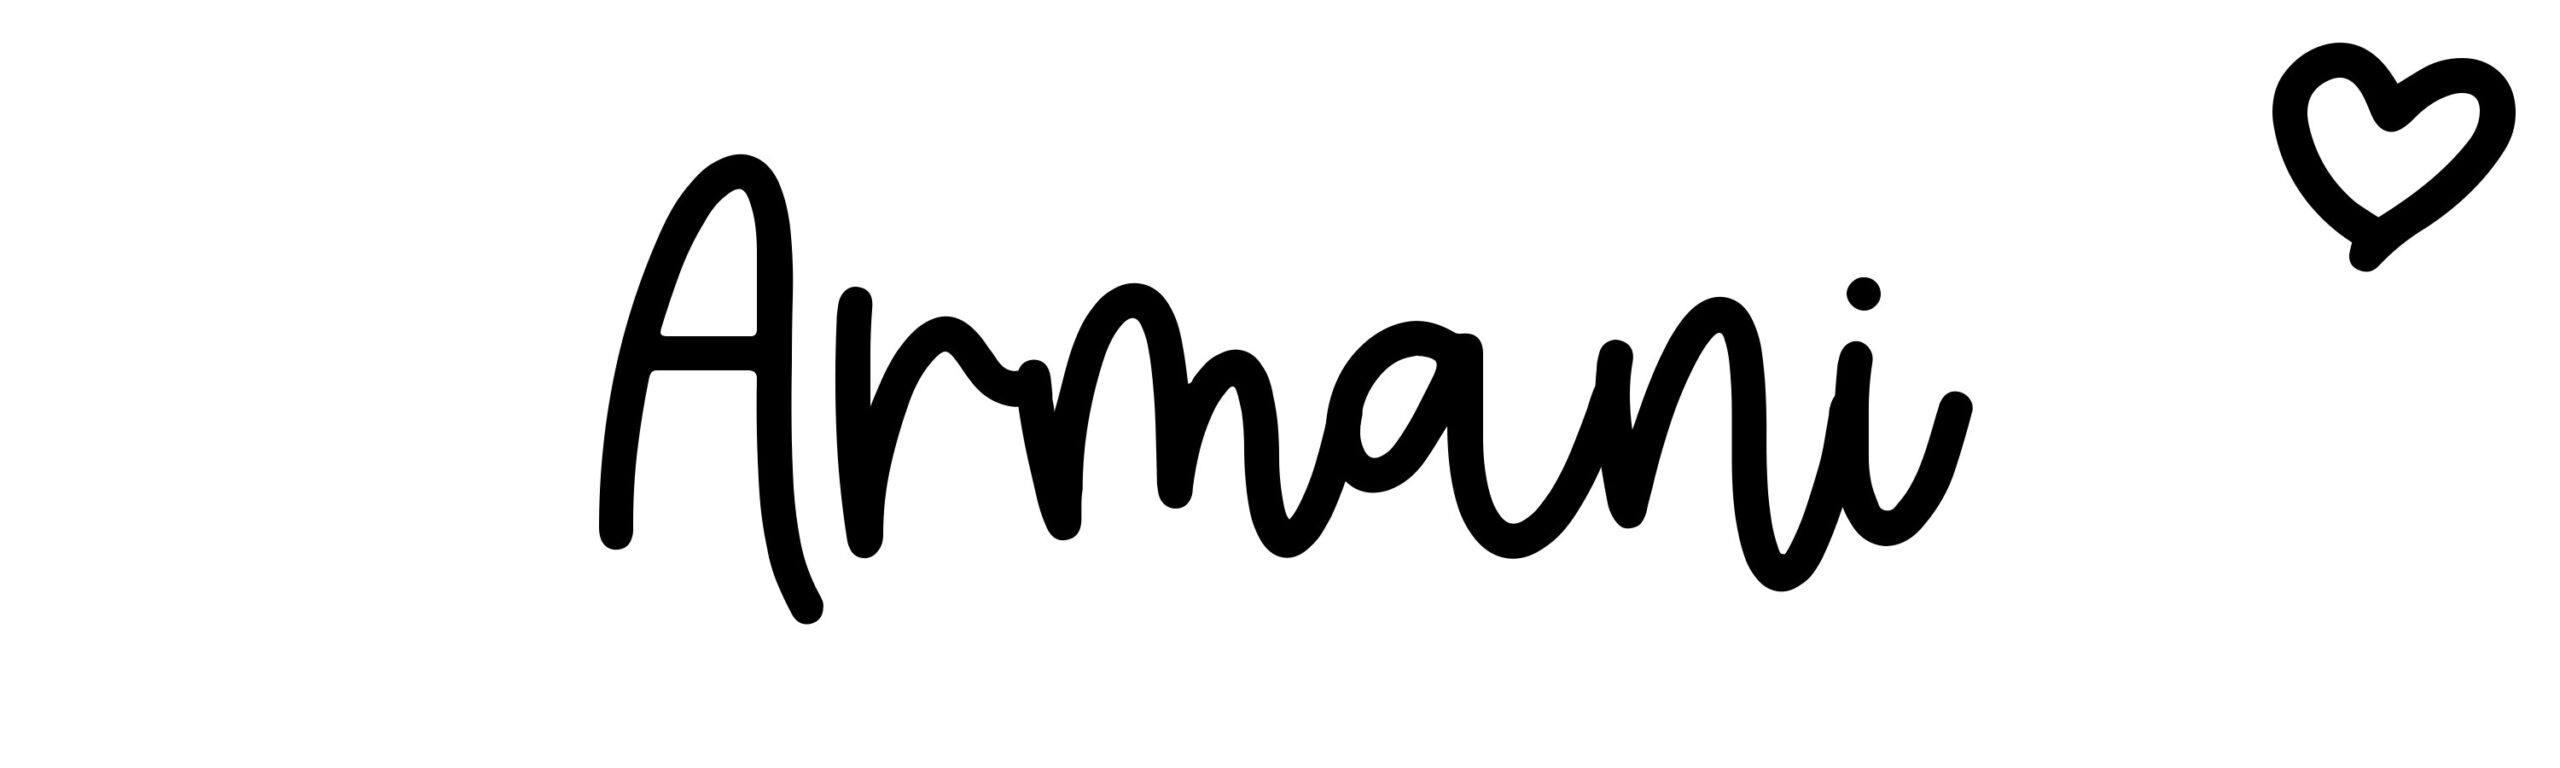 Armani - Name meaning, origin, variations and more